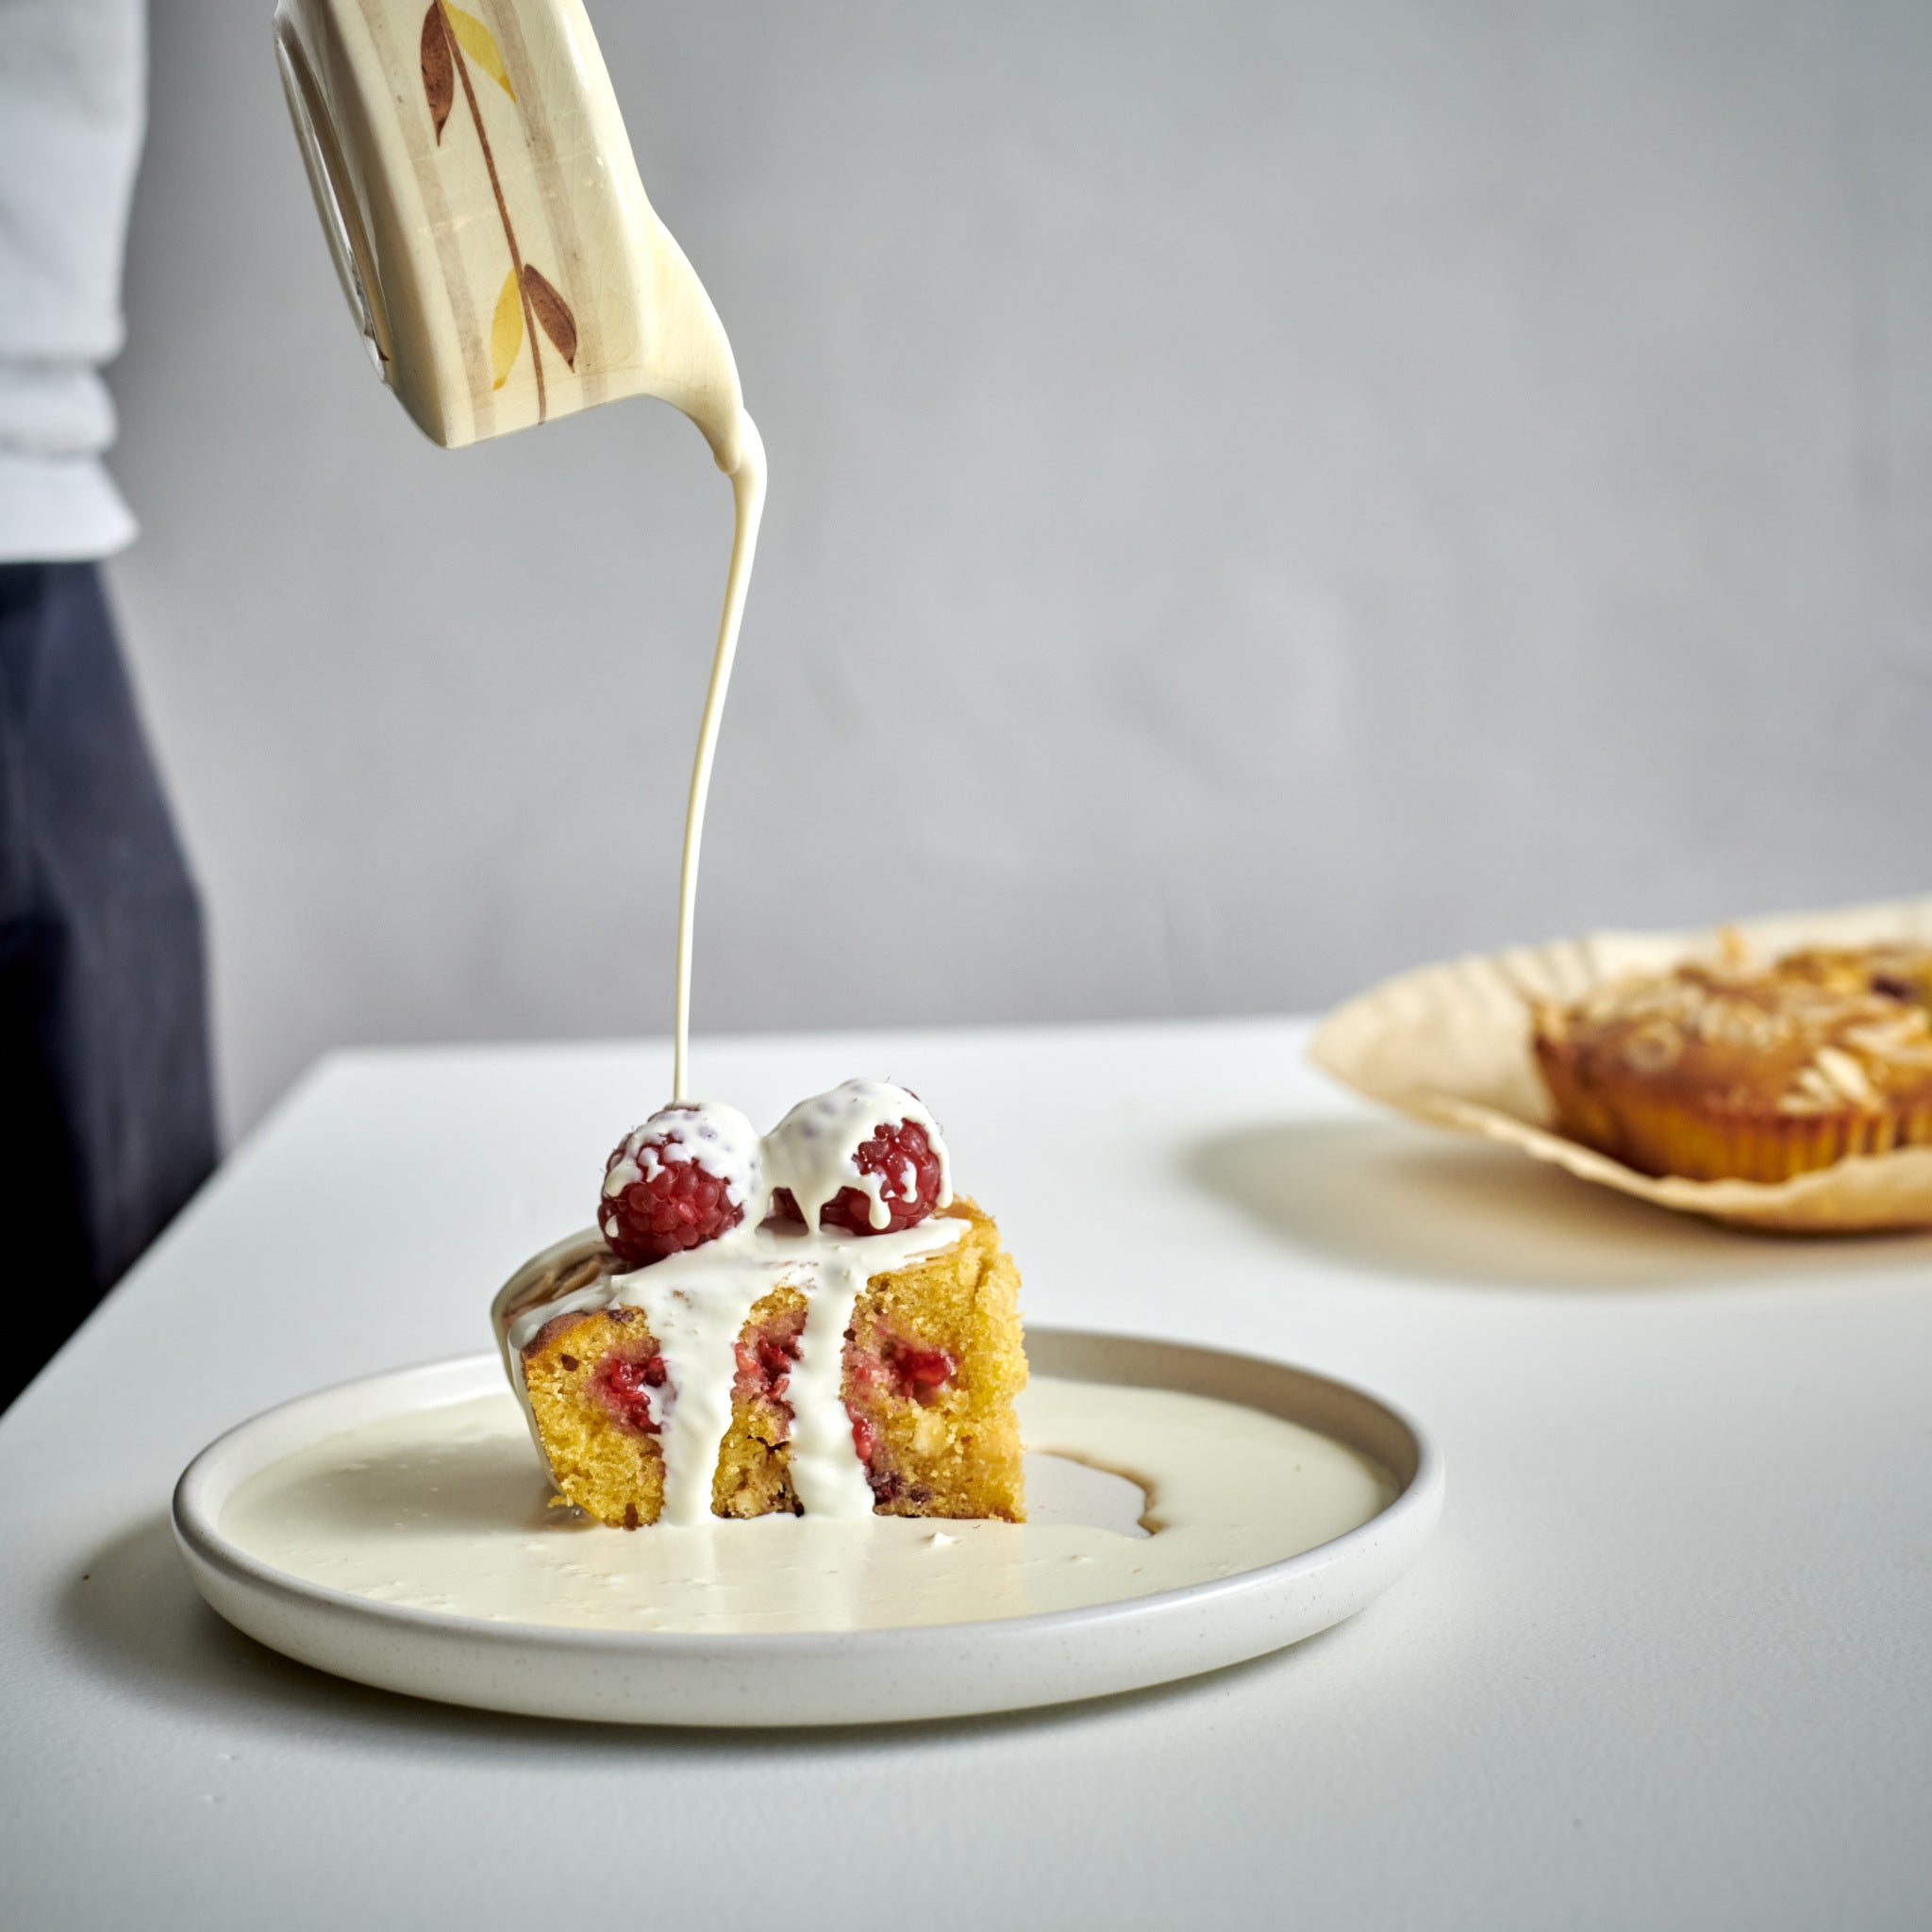 Single portion of Exploding Bakery Raspberry and White Chocolate Frangipane Cake served with cream.